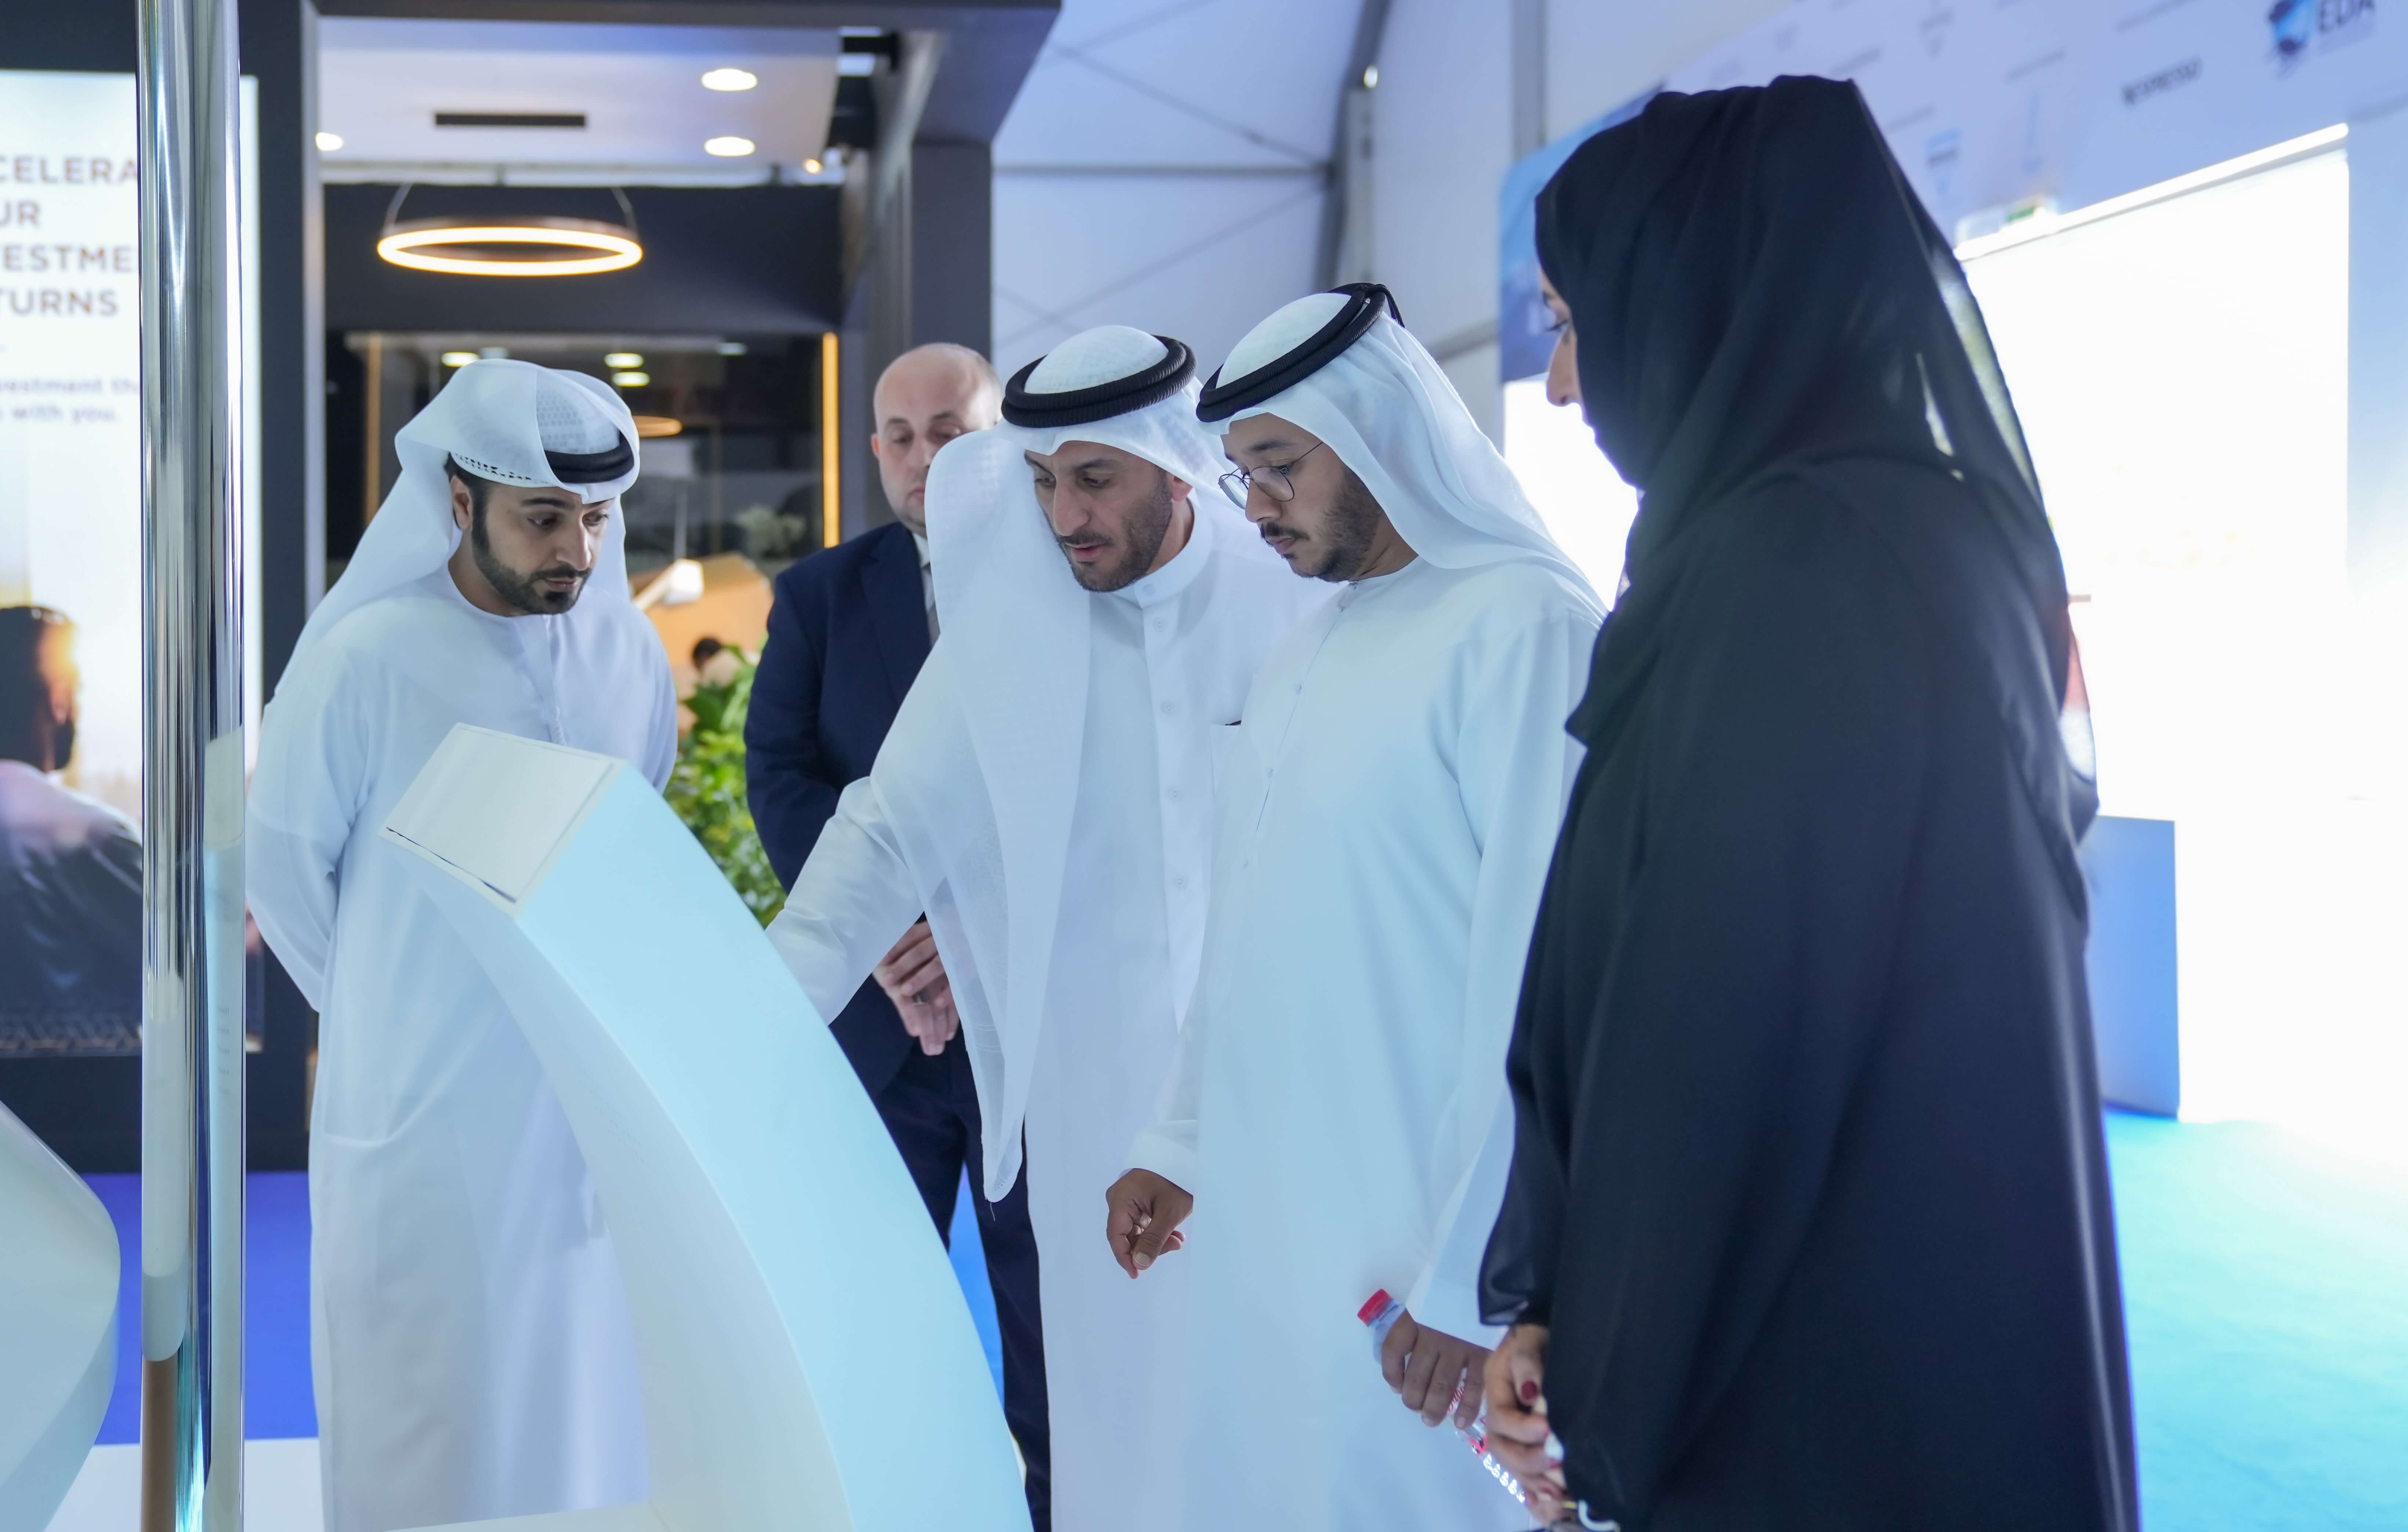 Dubai Maritime Authority: A plan to launch initiatives supporting maritime operators, boats and yacht owners, and marine service companies